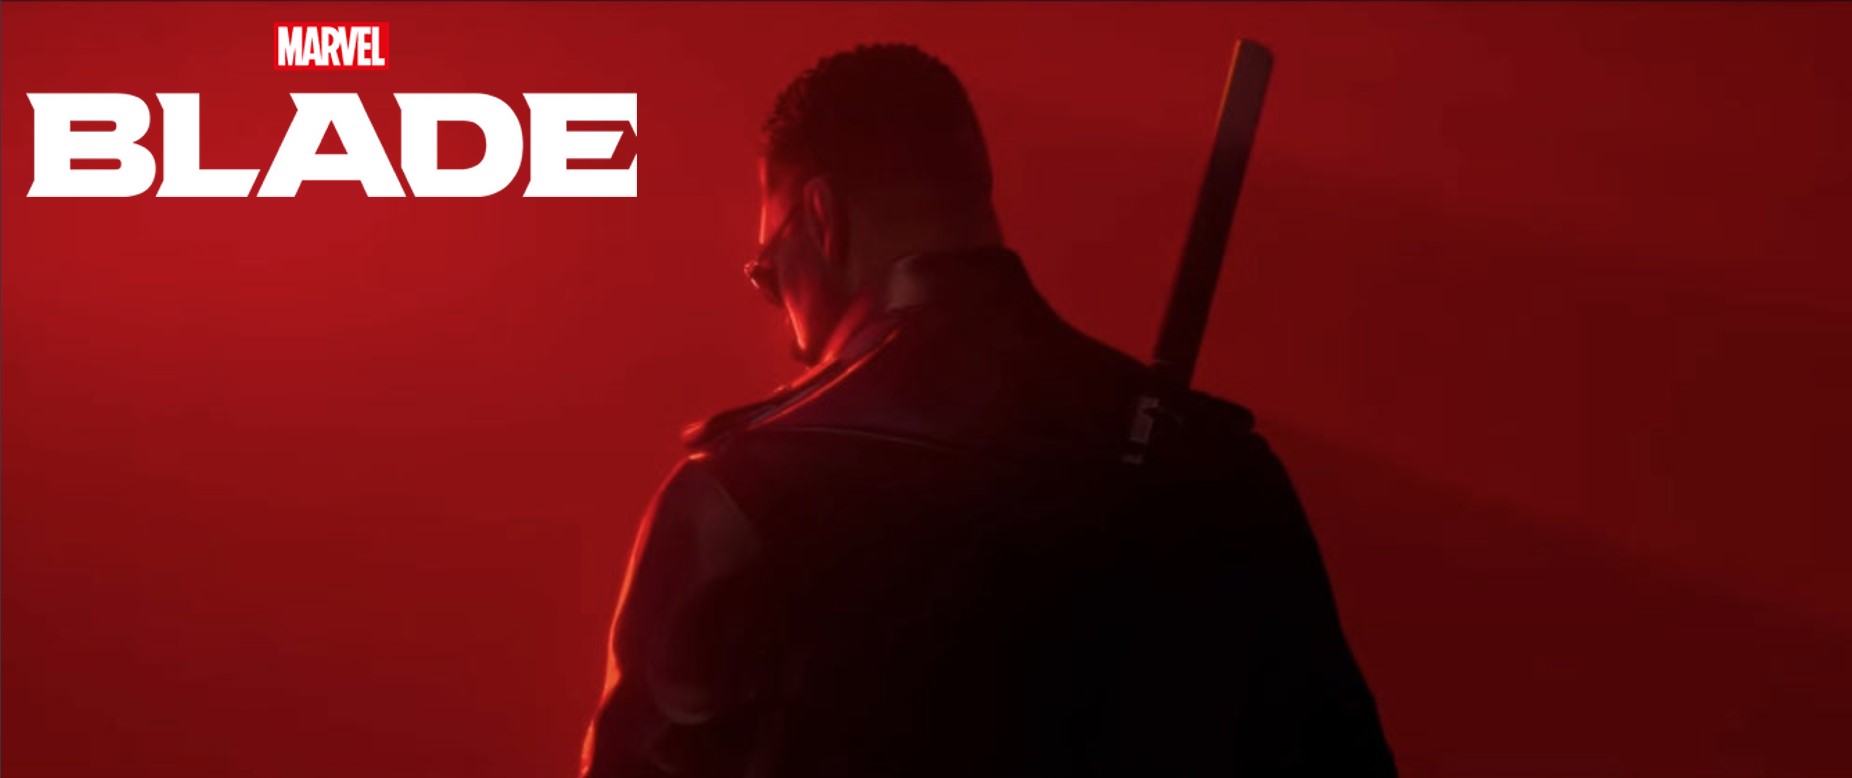 The New Marvel's Blade game was revealed at The game Awards